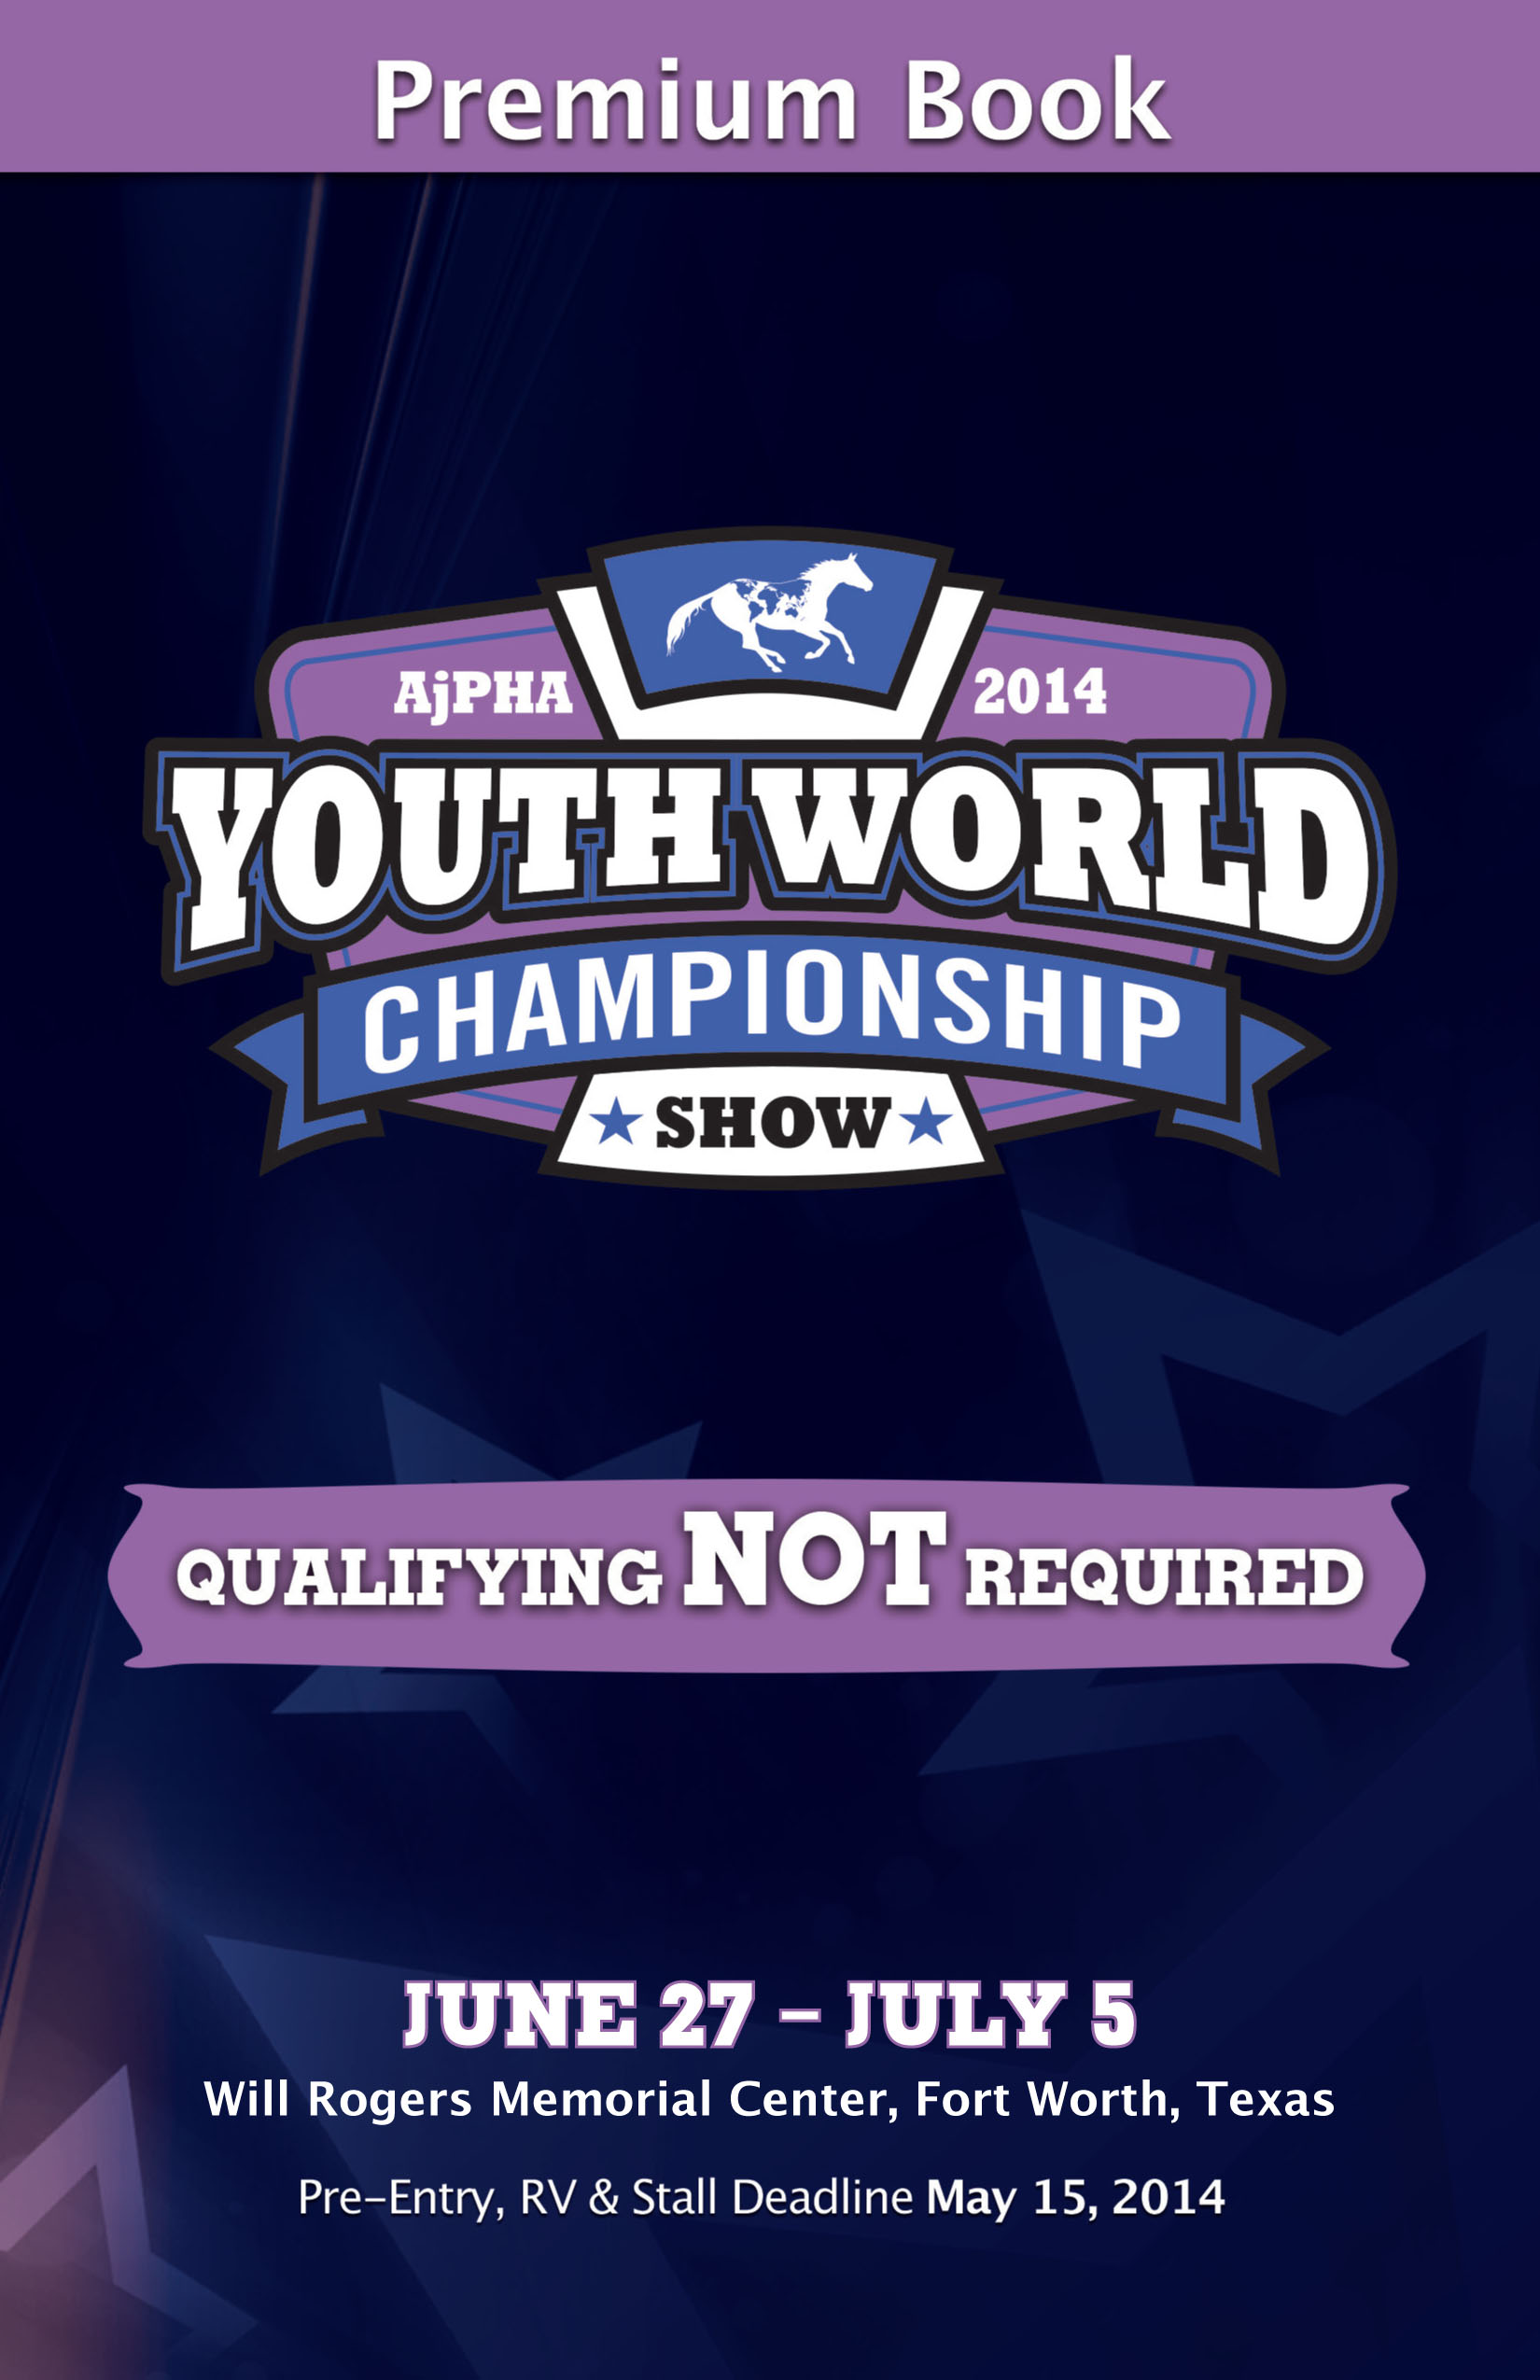 2014 AjPHA Youth World Show Premium Book and Entry Forms Now Available Online